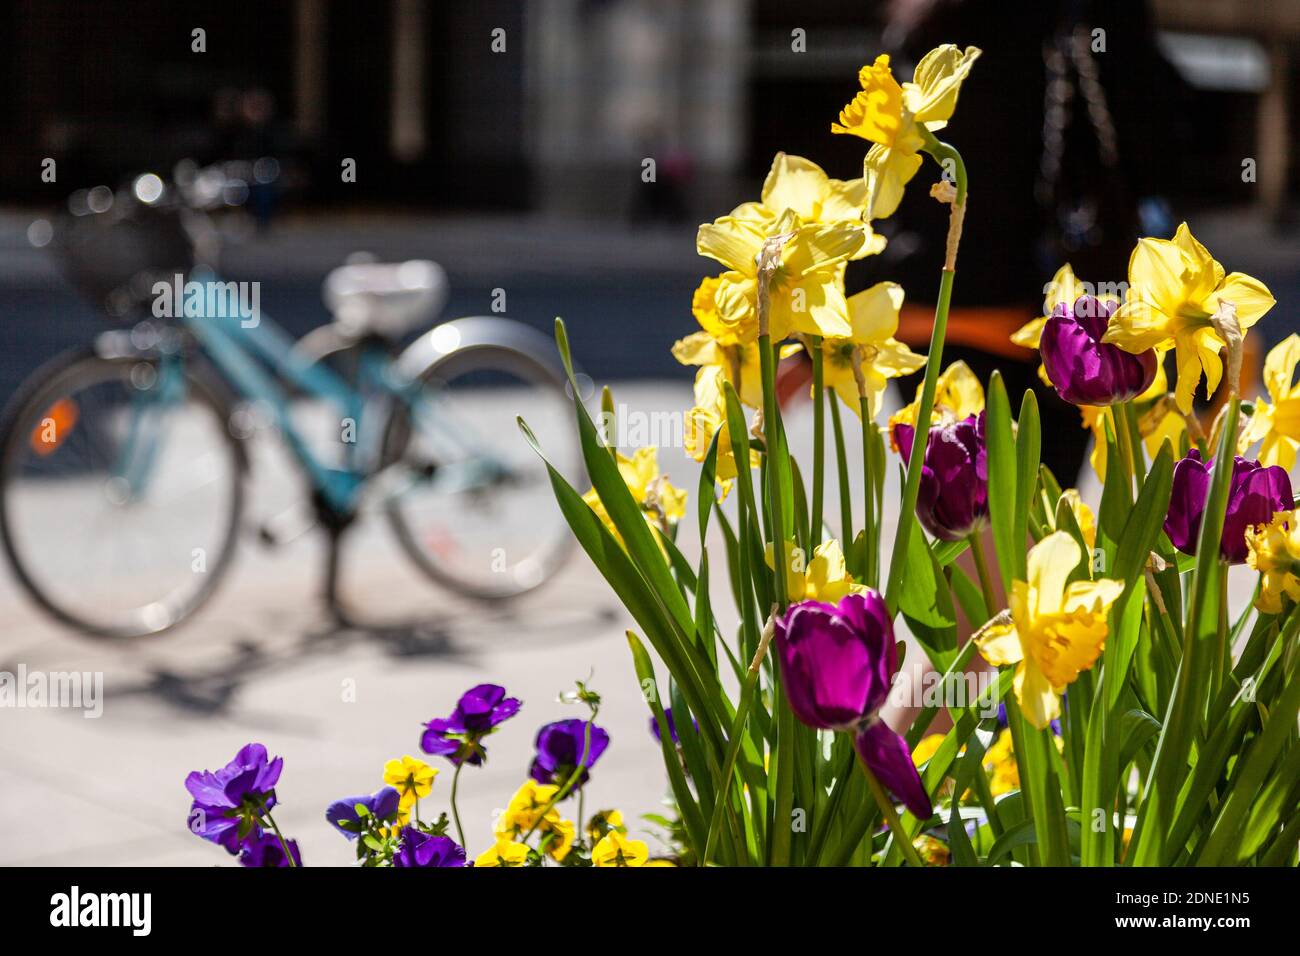 City scene with flowers in a planter with a bicycle parked in the Background. Stock Photo